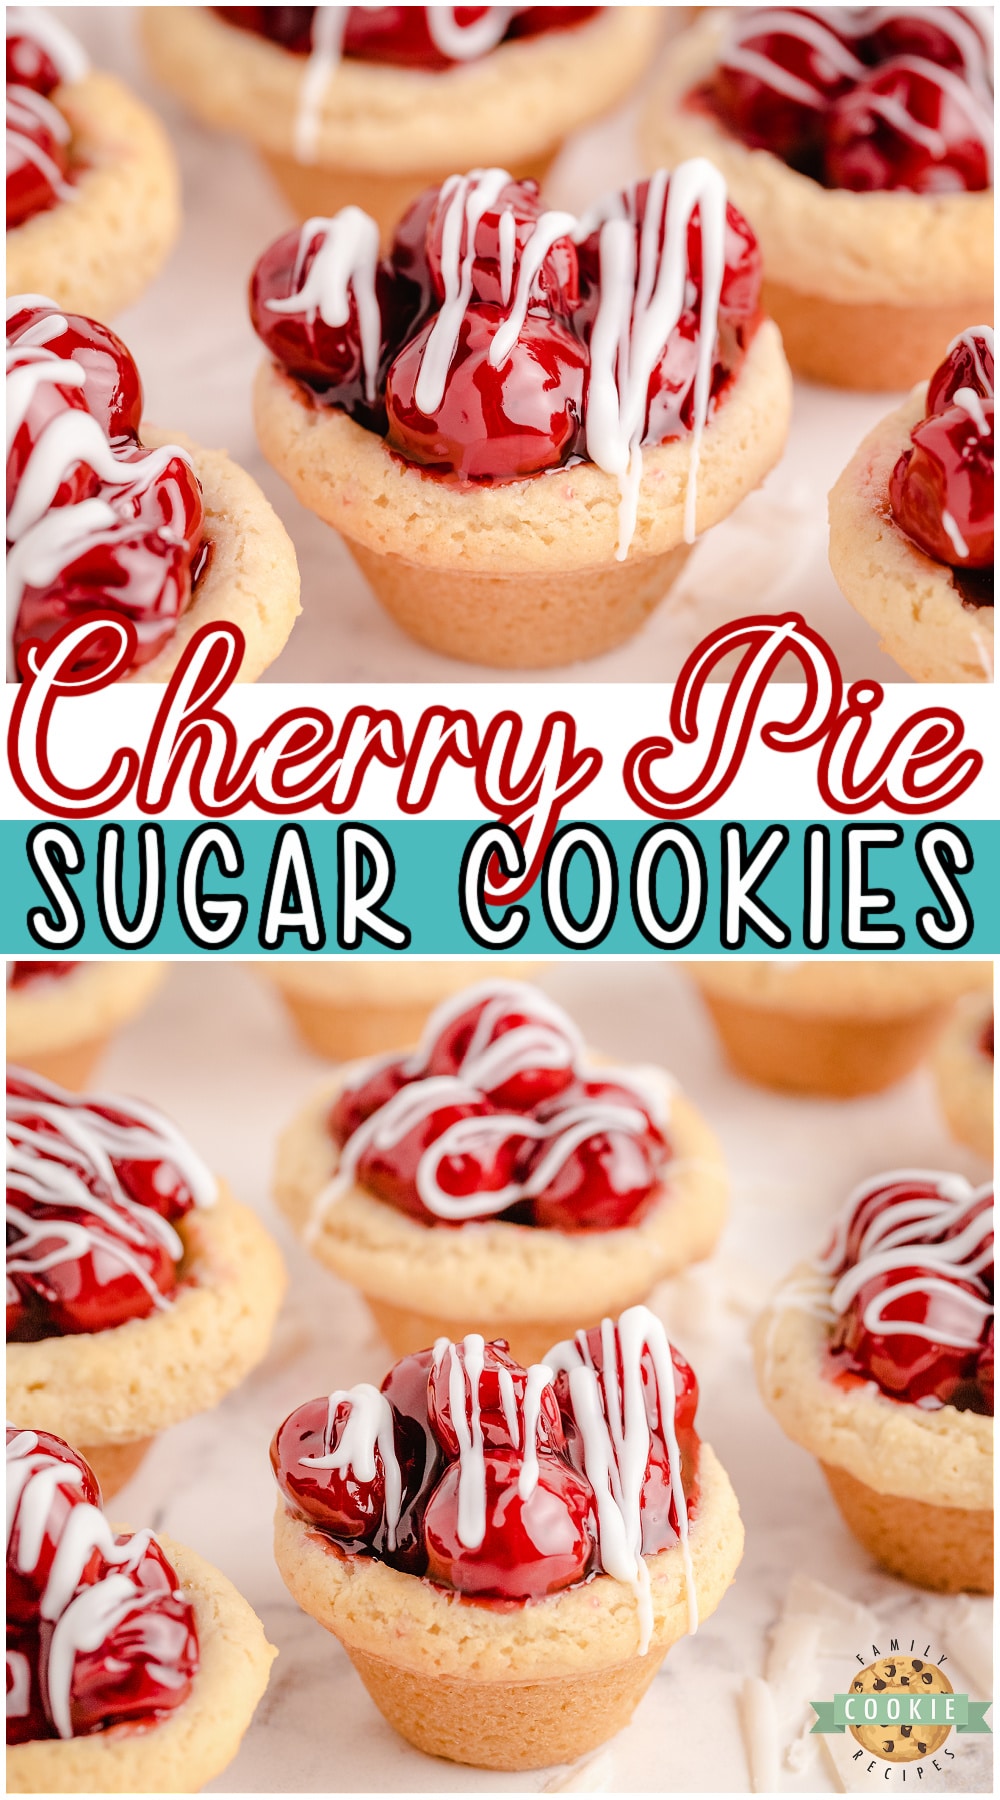 Cherry Pie Cookies are cherry pie in cookie form! Easy to make sugar cookies filled with sweet cherries and drizzled with white chocolate. #cookies #cherrypie #baking #dessert from FAMILY COOKIE RECIPES via @buttergirls